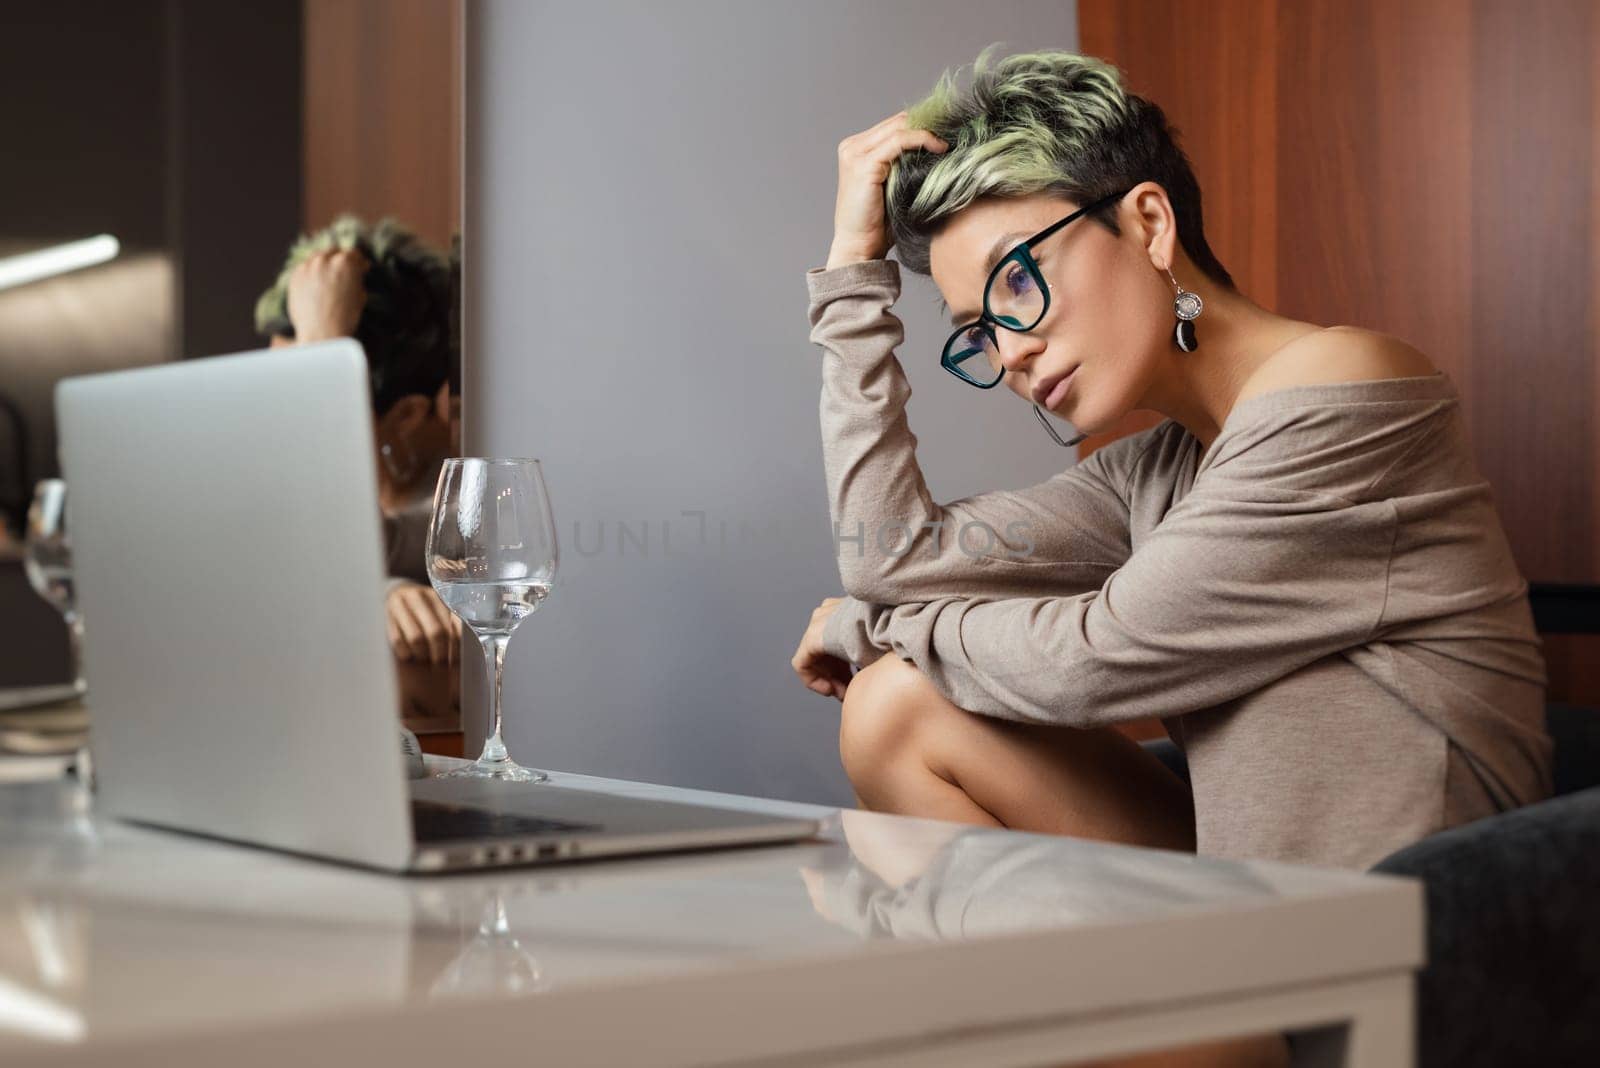 a beautiful girl with short hair and glasses is sitting indoors at a laptop chatting and working online